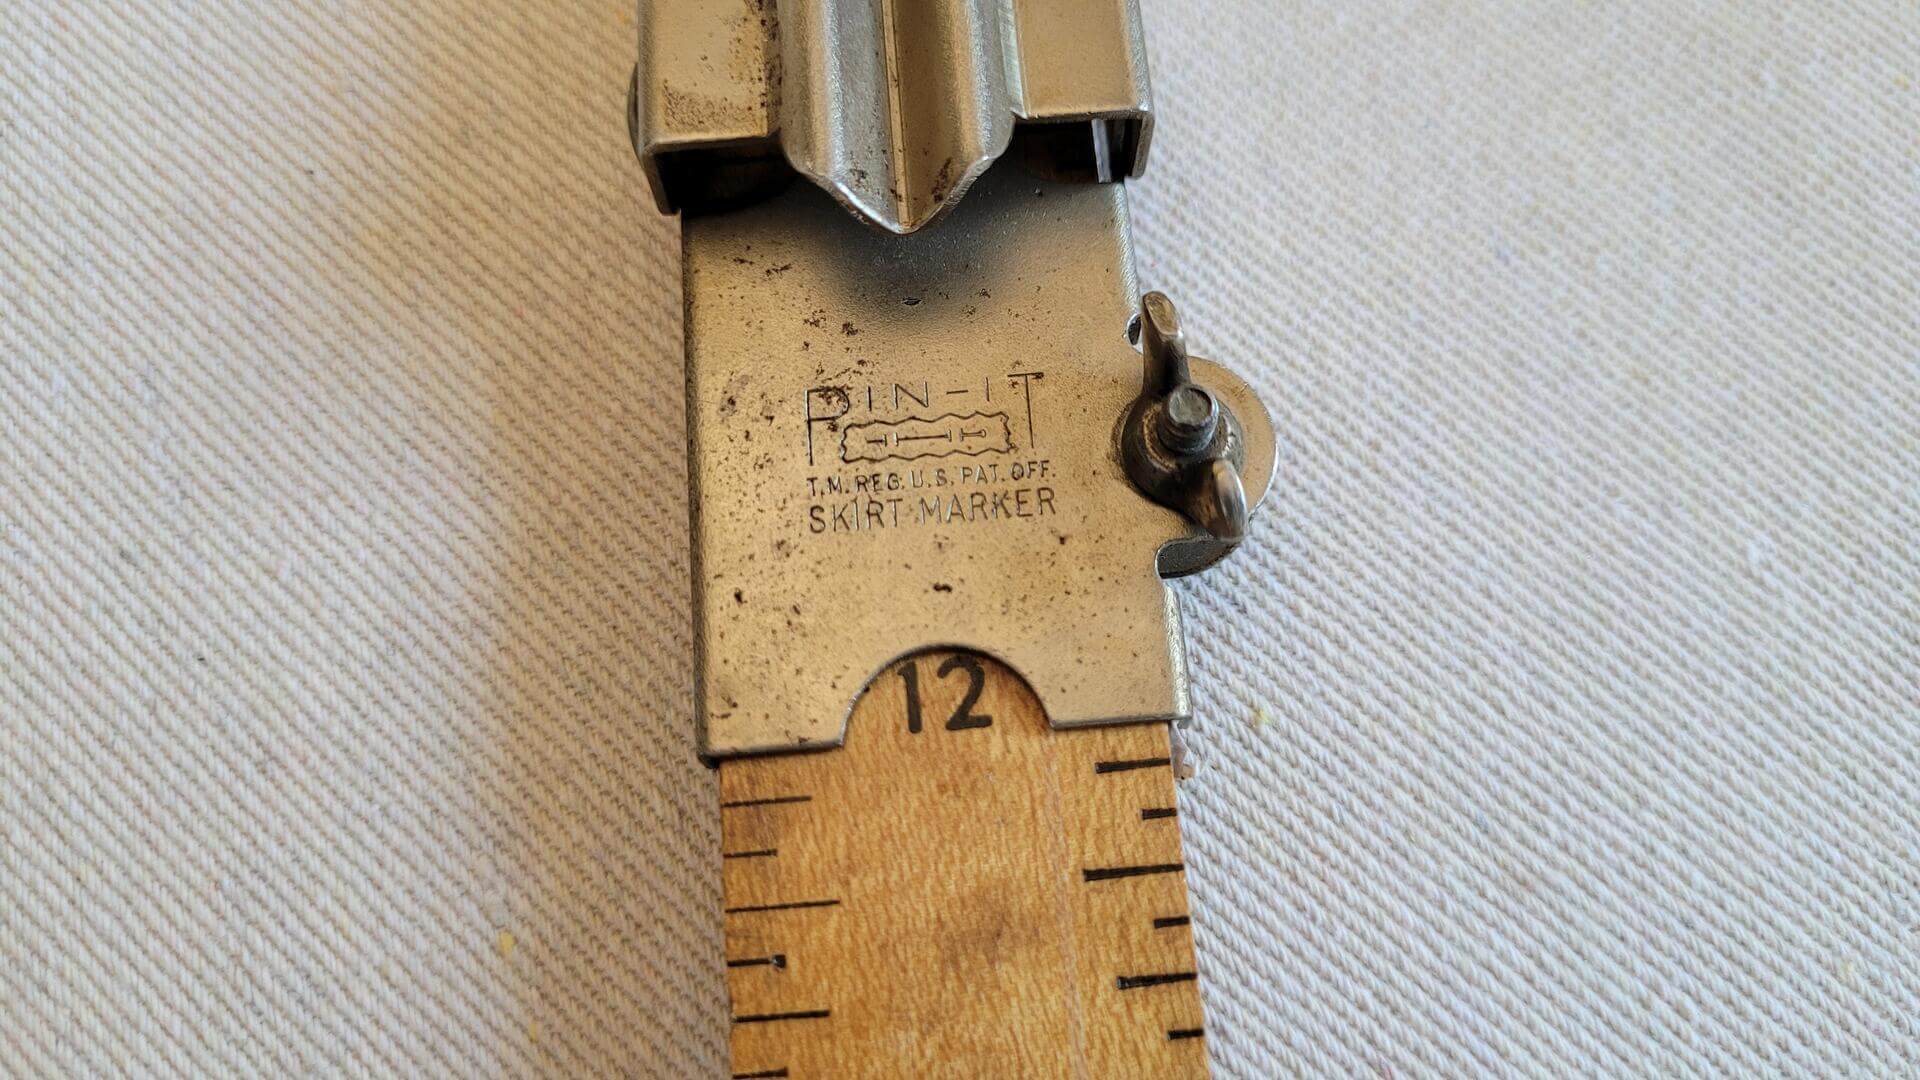 Pin It skirt marker hem line measuring tool with adjustable mount by Orco Products Inc from Dayton Ohio. Vintage MCM made in USA collectible sewing tools and accessories